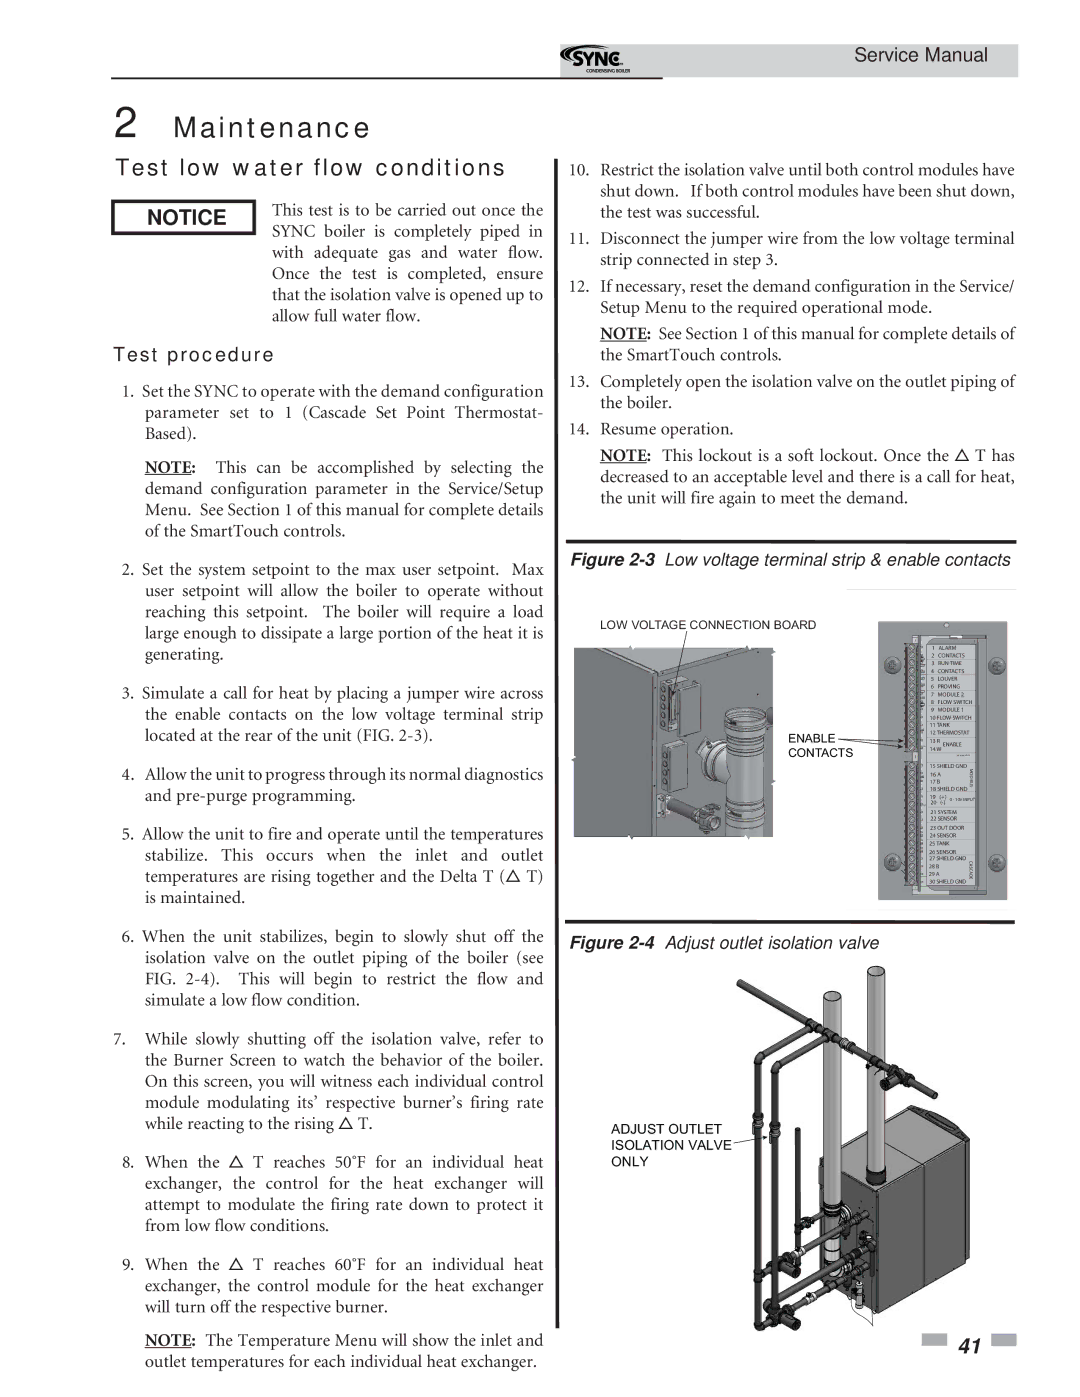 Lochinvar 1 service manual Test low water flow conditions, Test procedure 